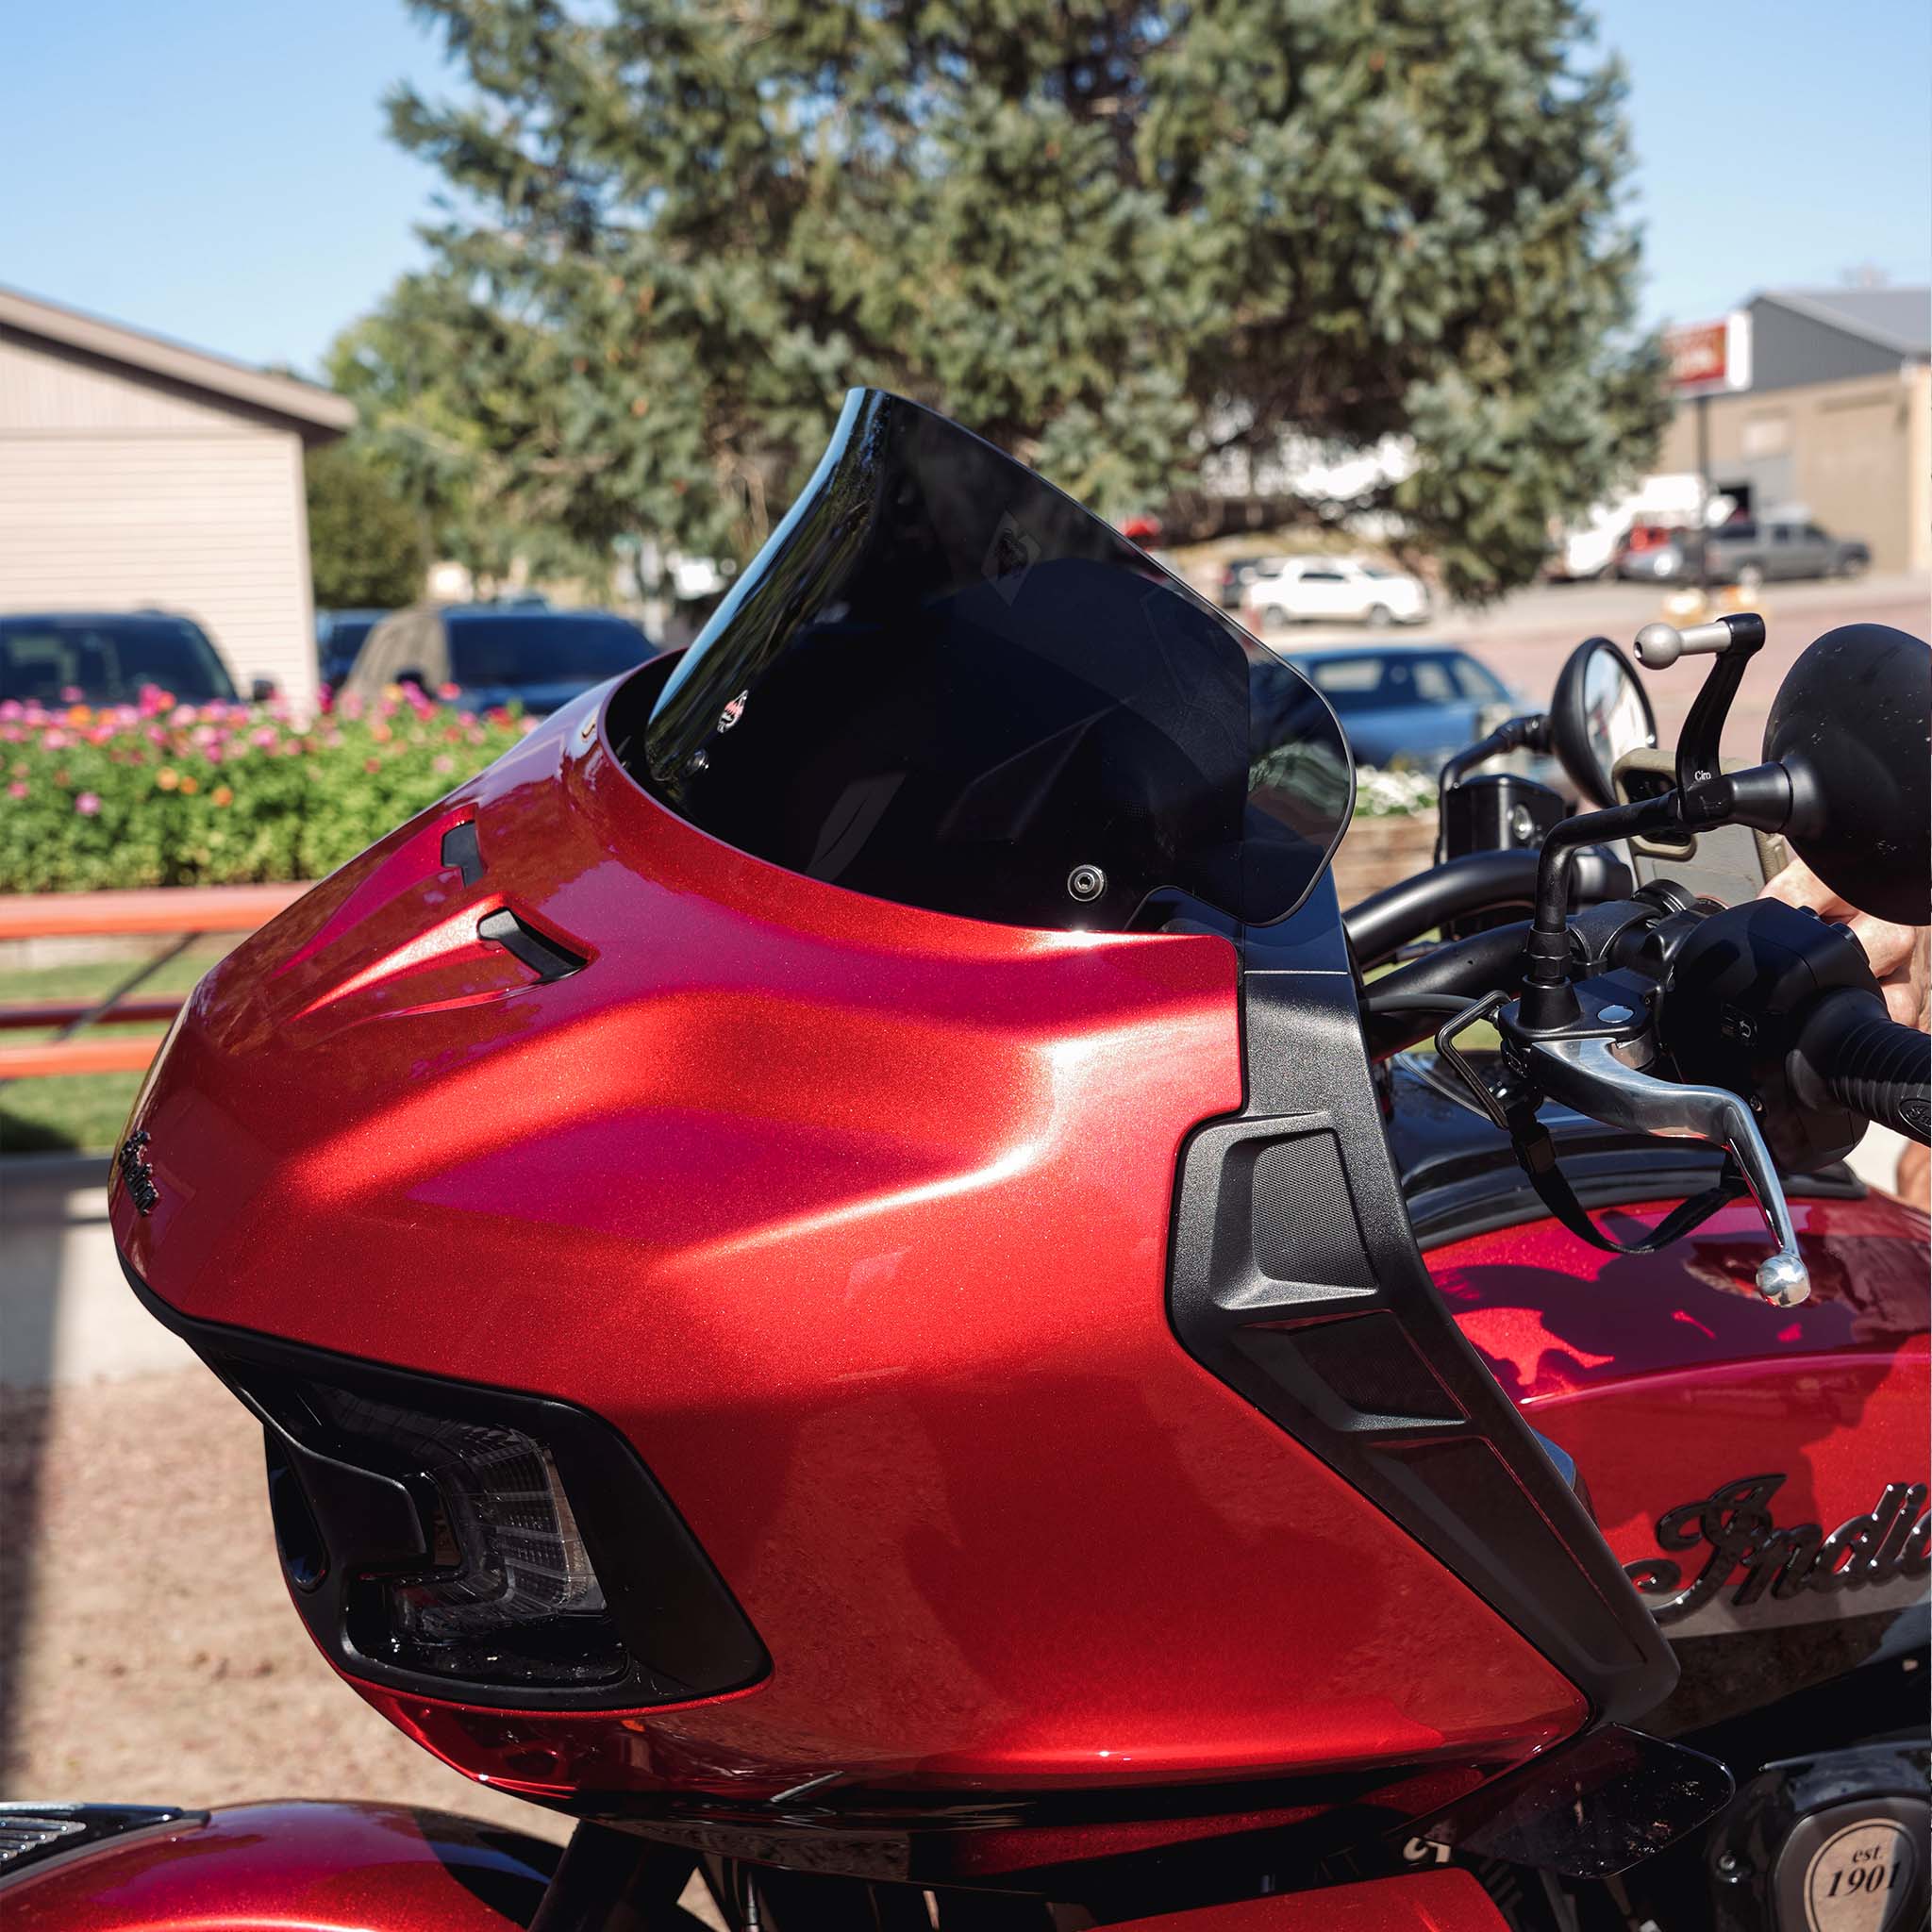 8" Dark Smoke Flare™ Windshield For 2020-2024 Indian® Challenger and Pursuit motorcycle models shown in down position(8" Dark Smoke - Down)